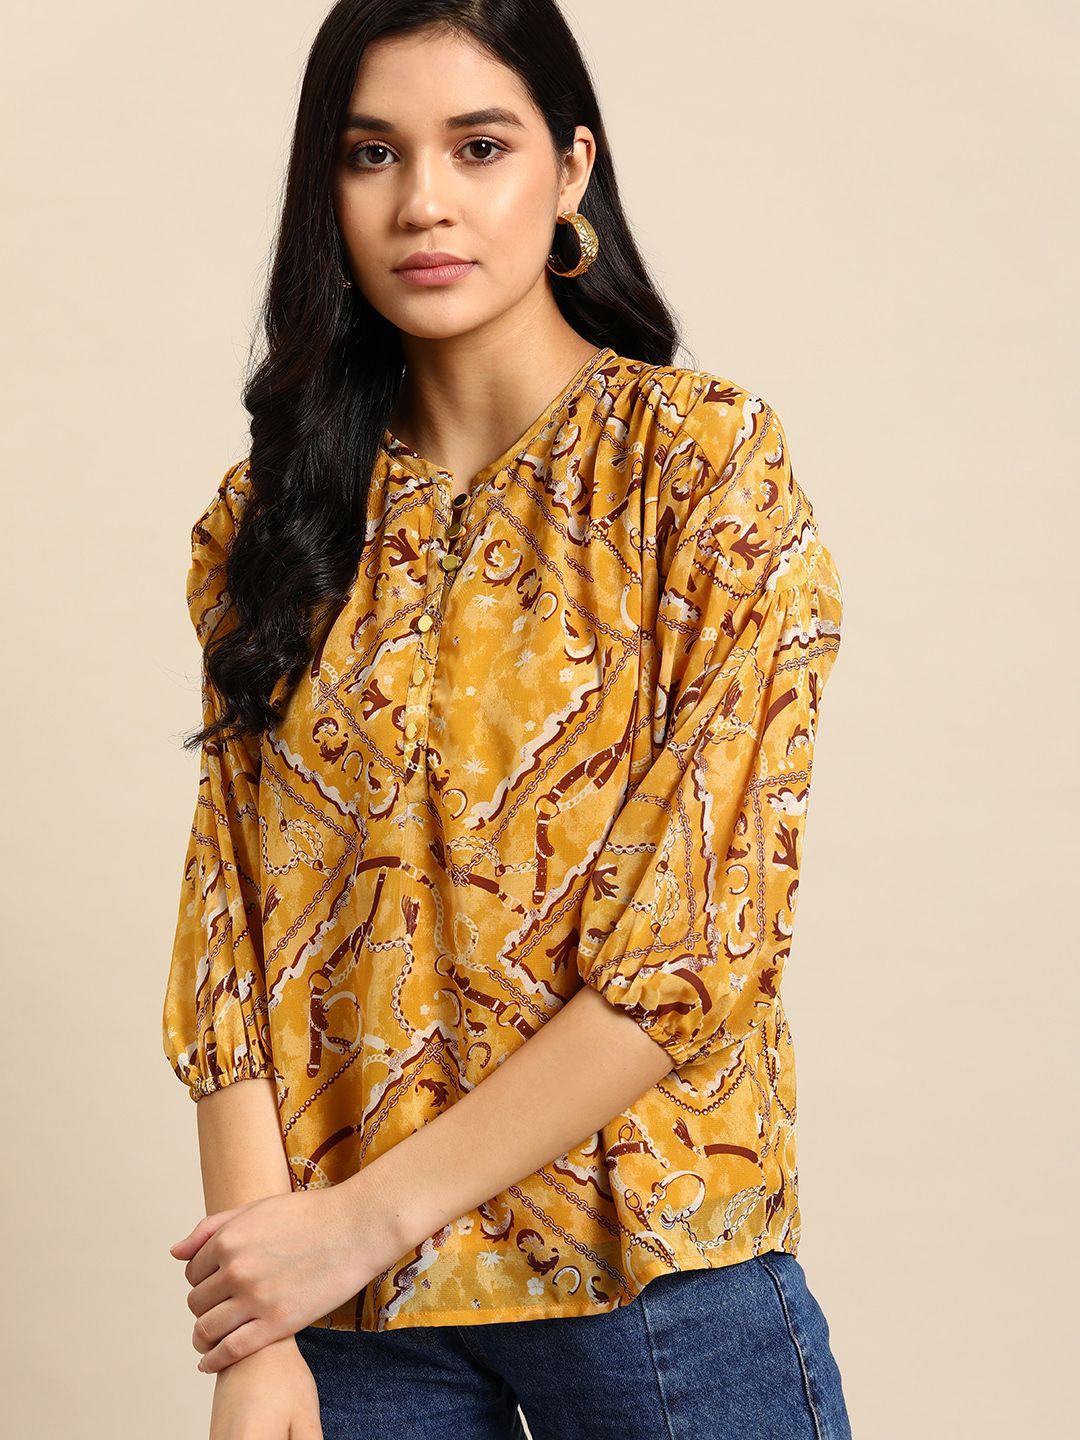 all about you printed puff sleeve shirt style top